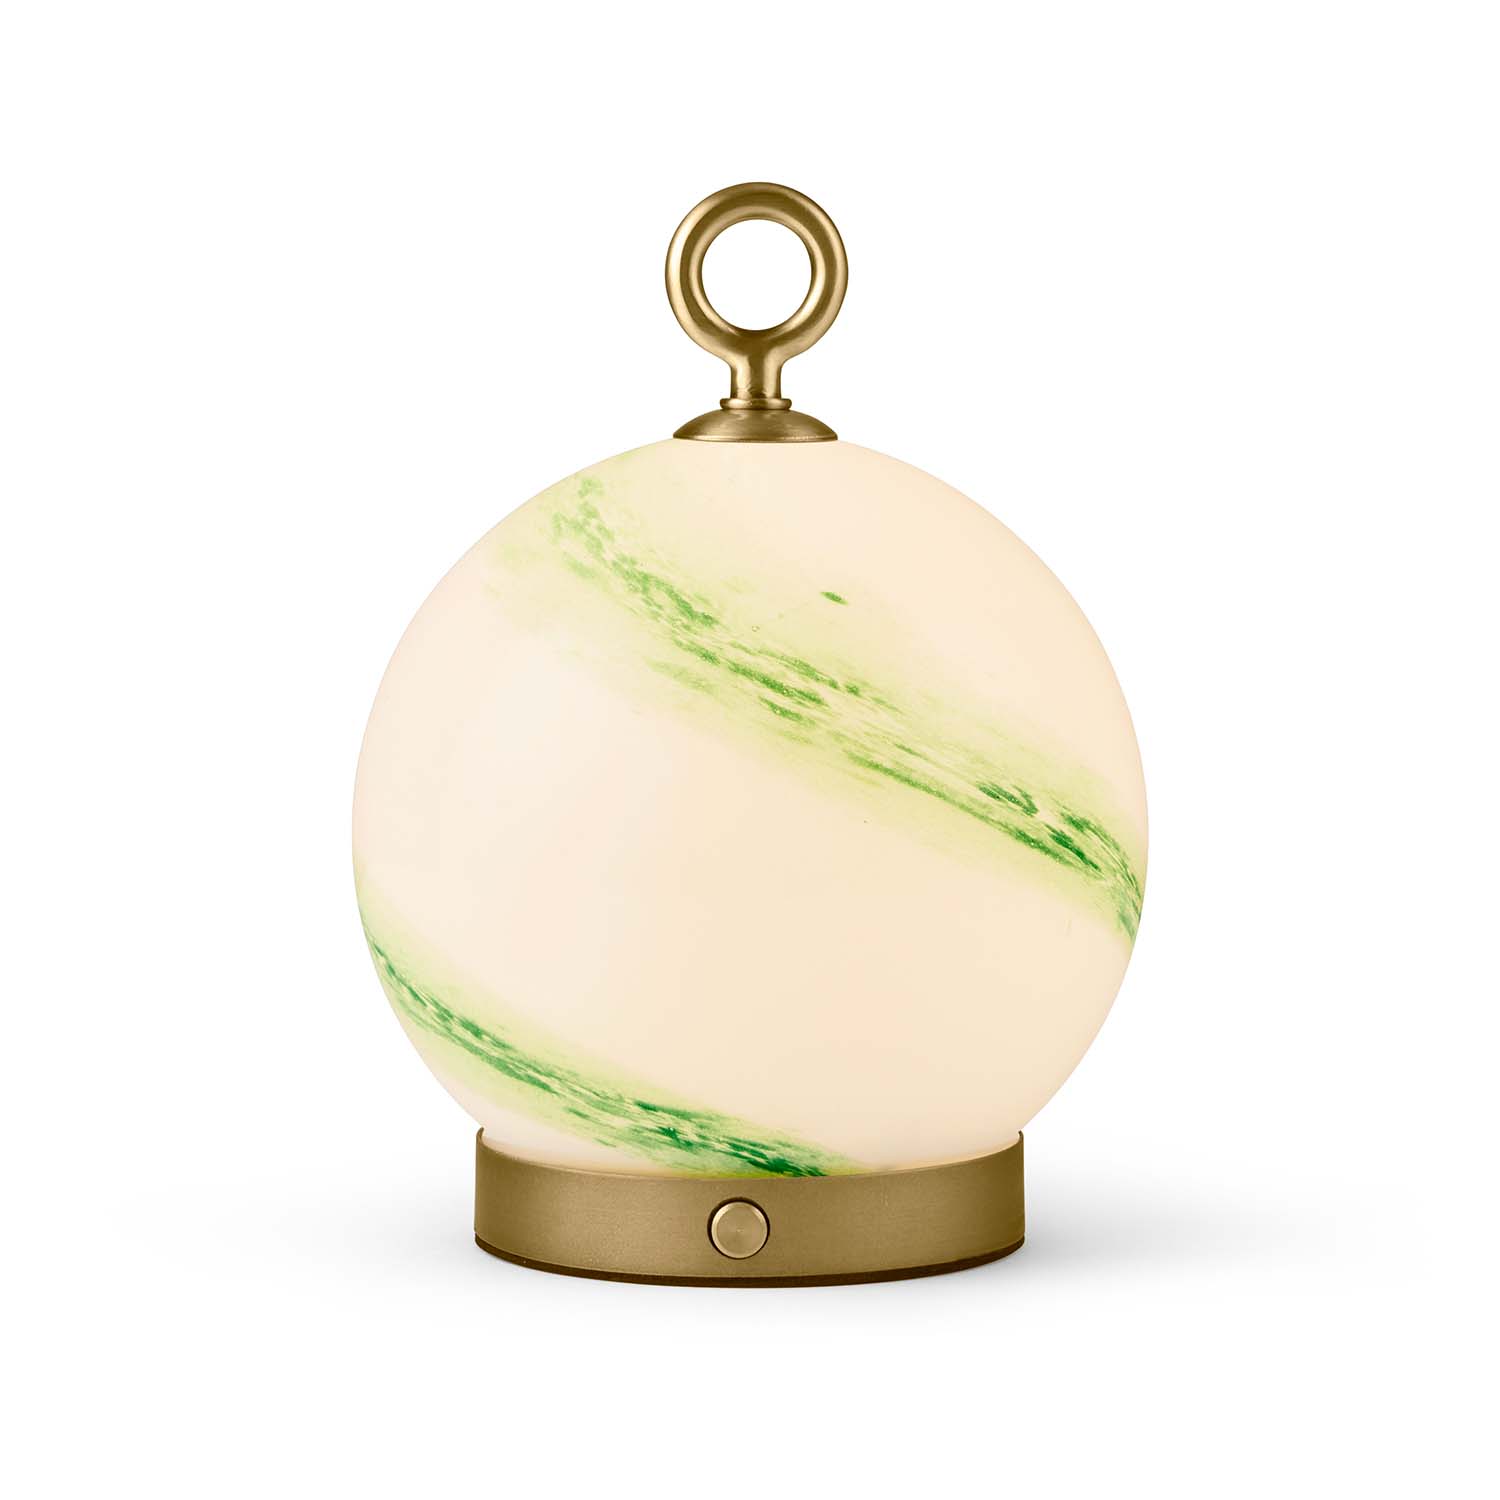 STOCKHOLM - Rechargeable marble-effect glass lamp